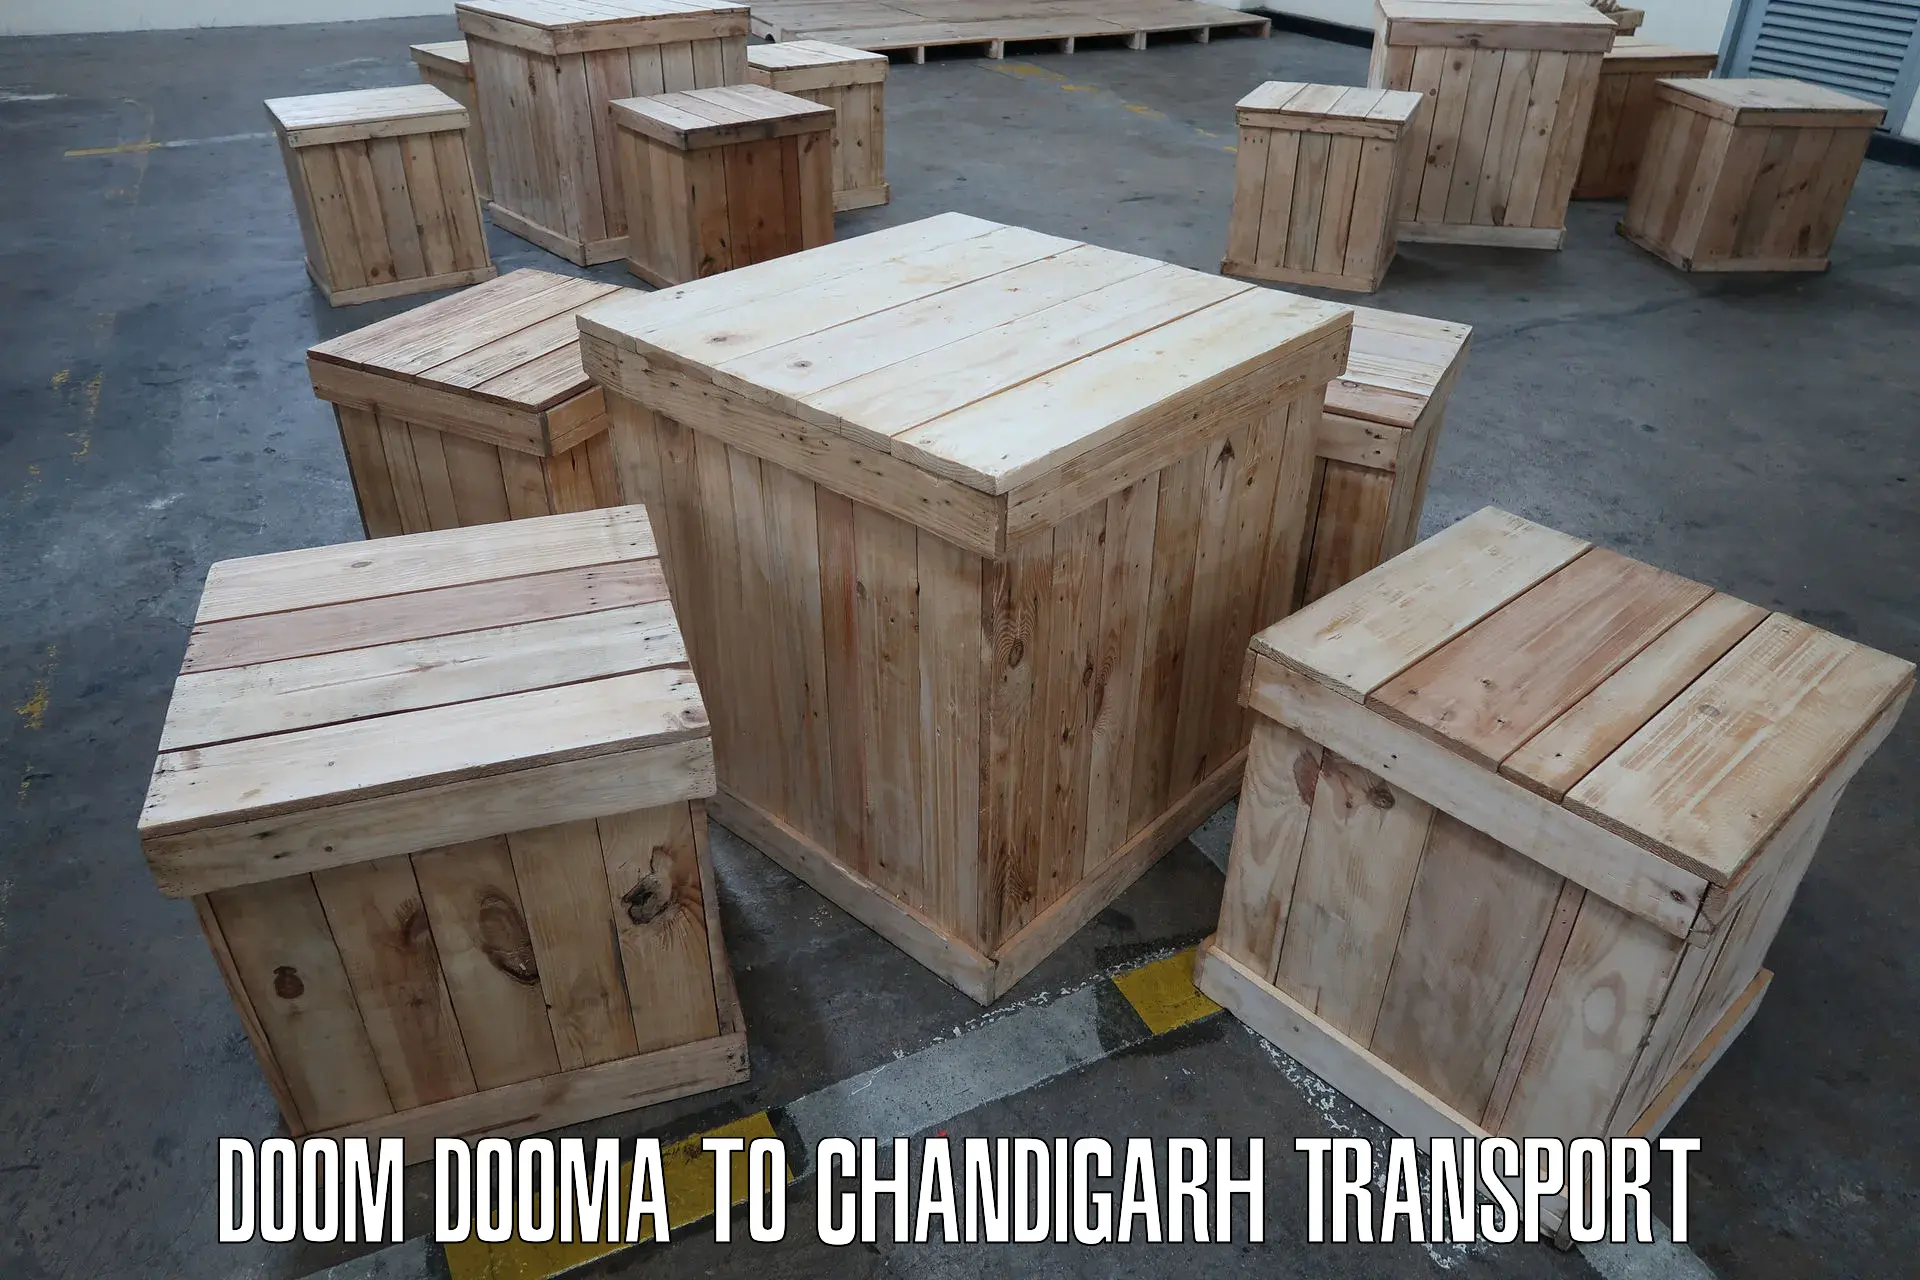 Shipping services Doom Dooma to Chandigarh